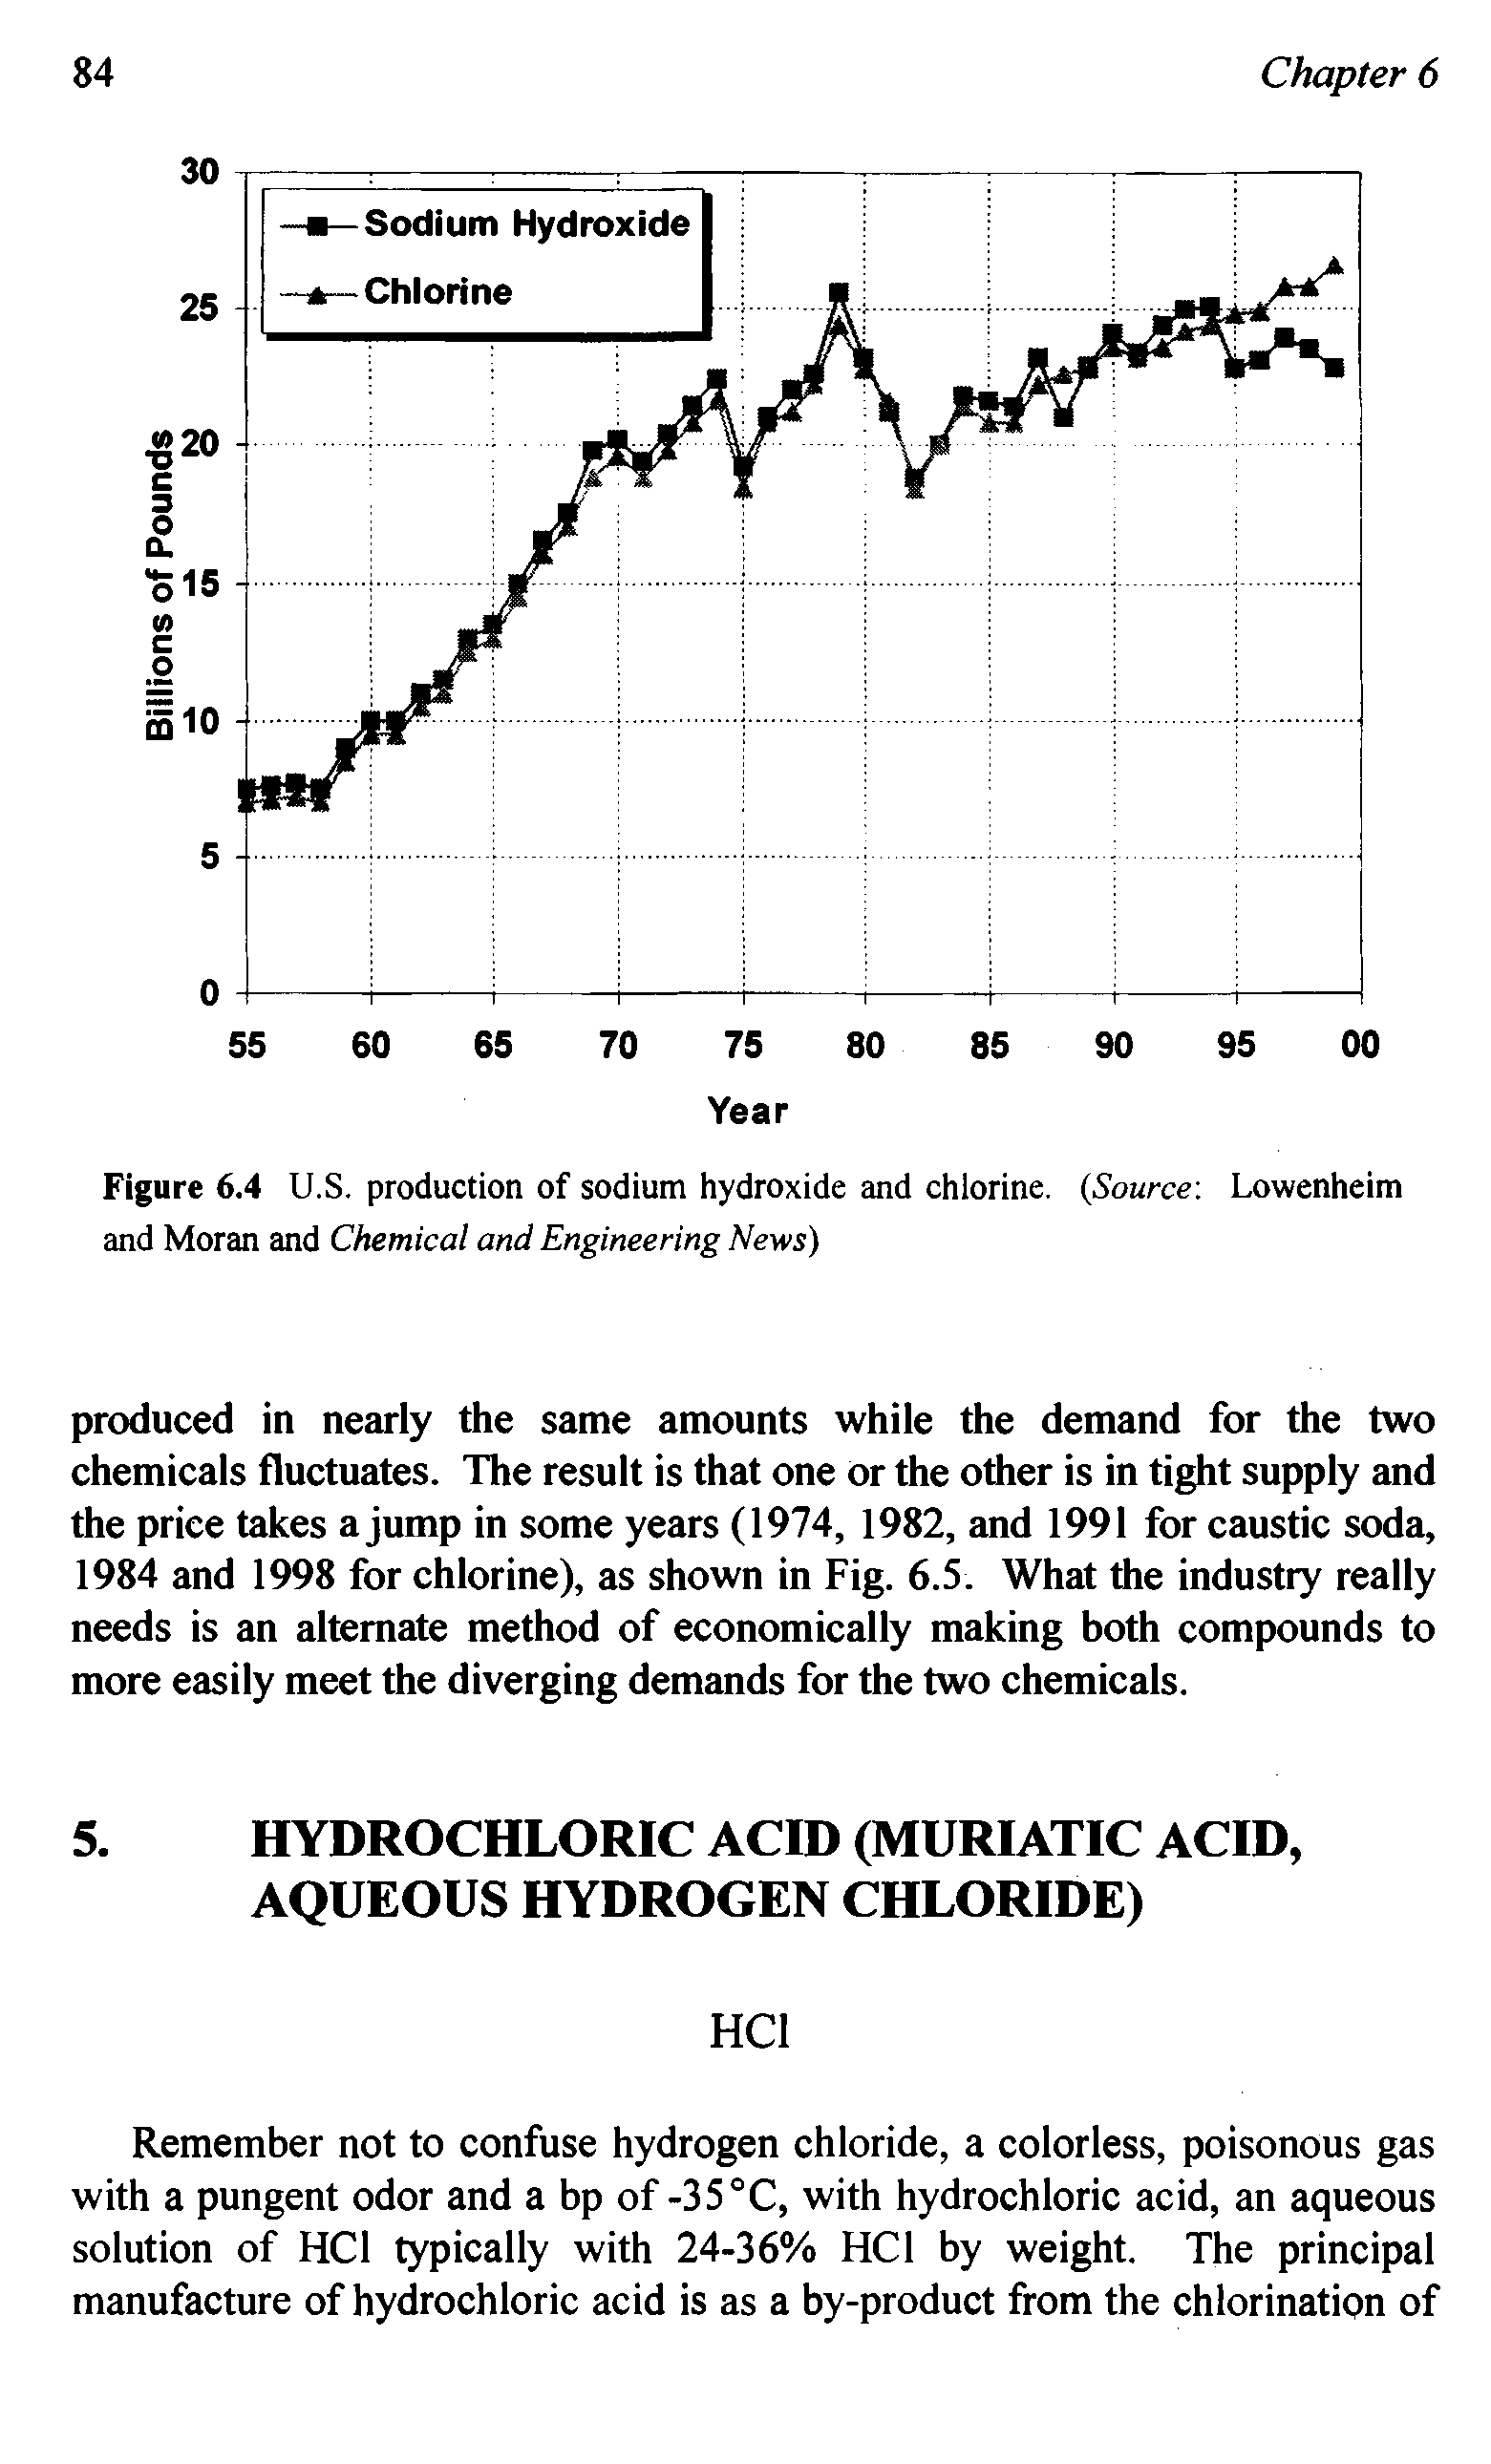 Figure 6.4 U.S. production of sodium hydroxide and chlorine, (Source Lowenheim and Moran and Chemical and Engineering News)...